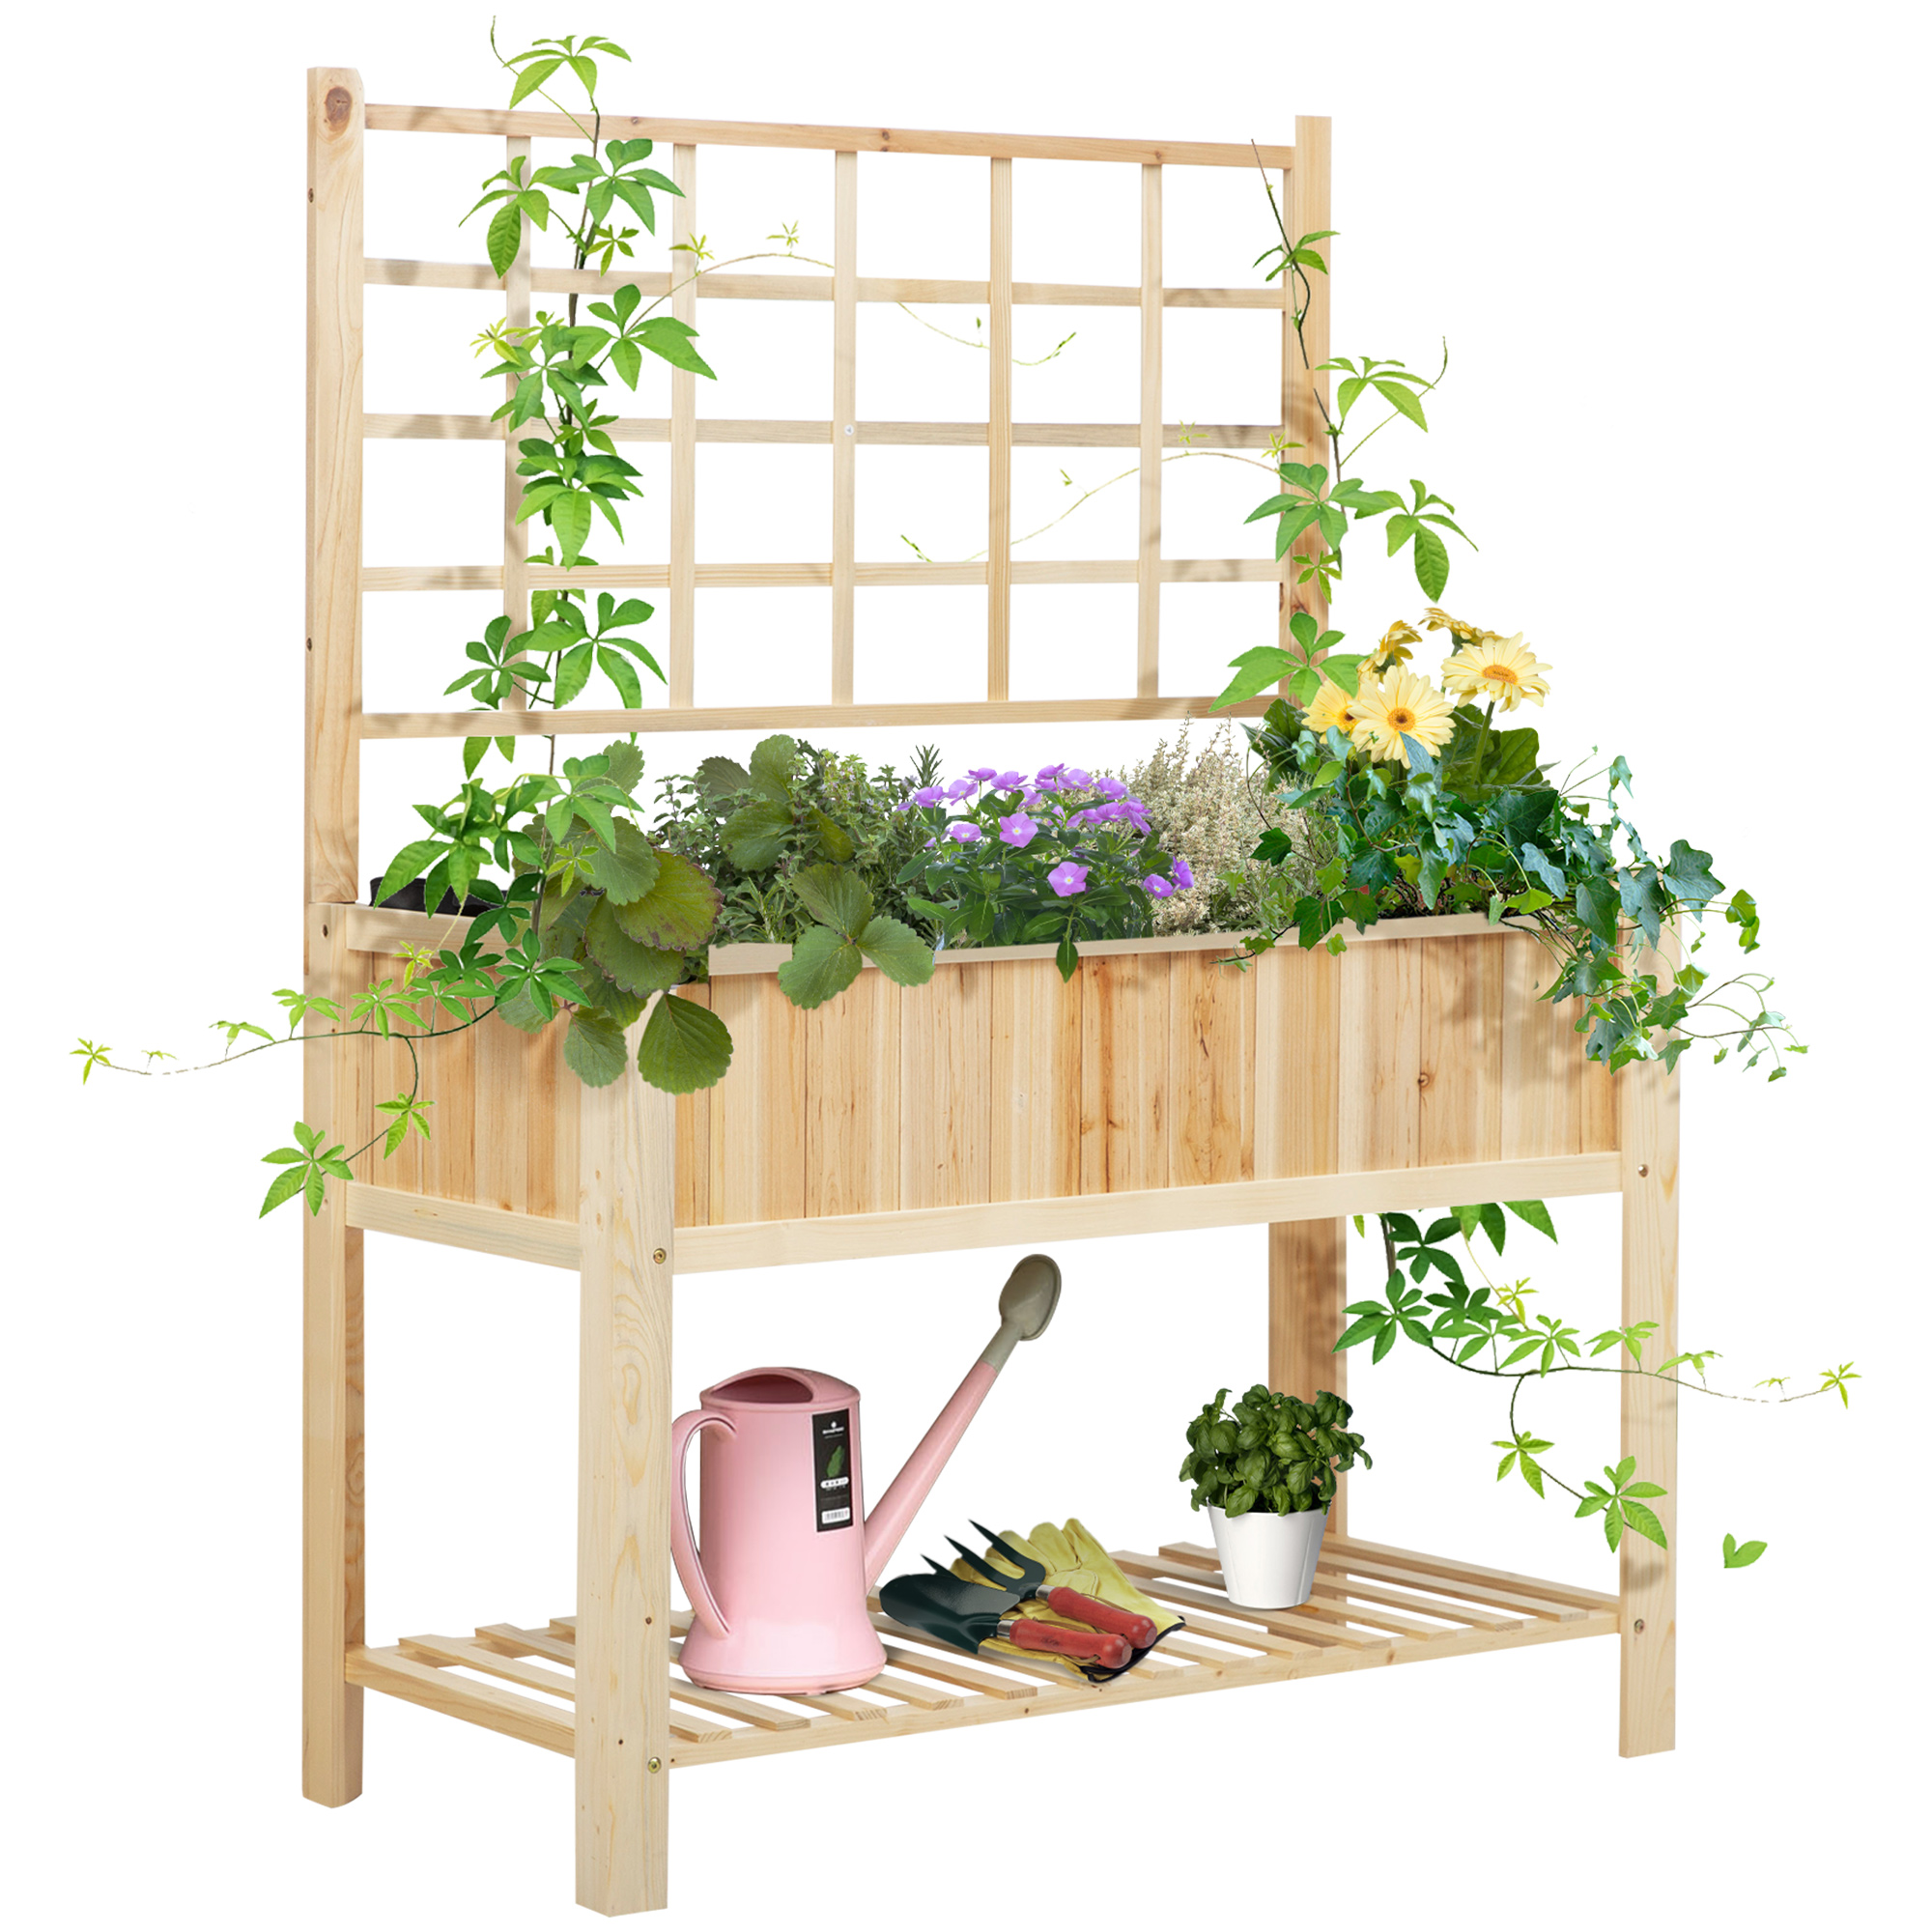 Outsunny Wooden Raised Garden Bed with Trellis, 64.25 in x 46.75 in x 22.75 in - image 1 of 9